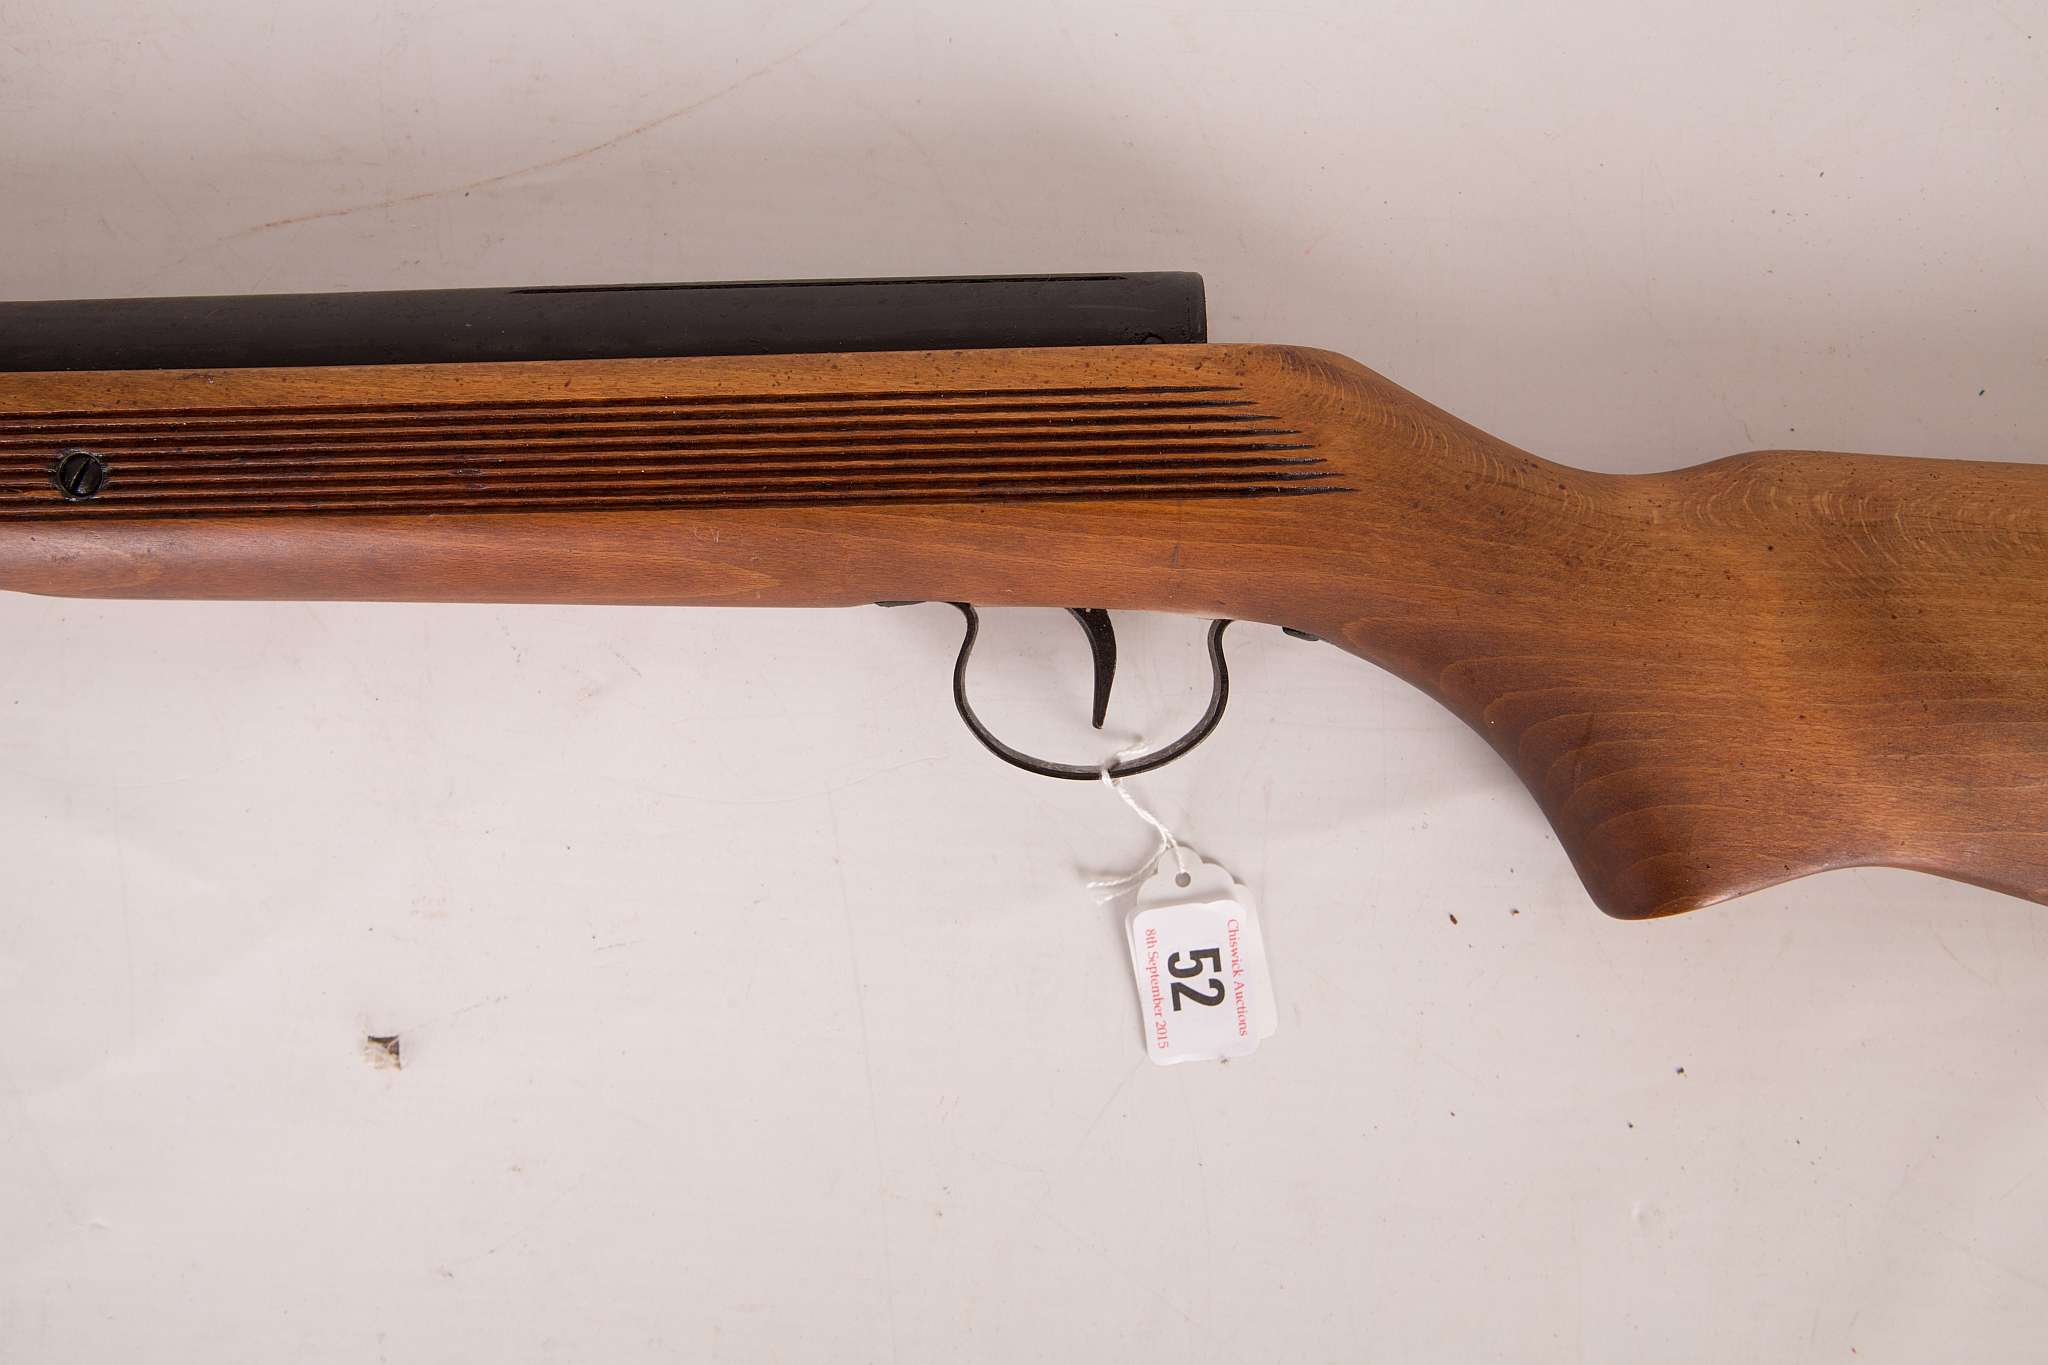 A vintage .11 under lever air rifle (Hungarian - Relum)